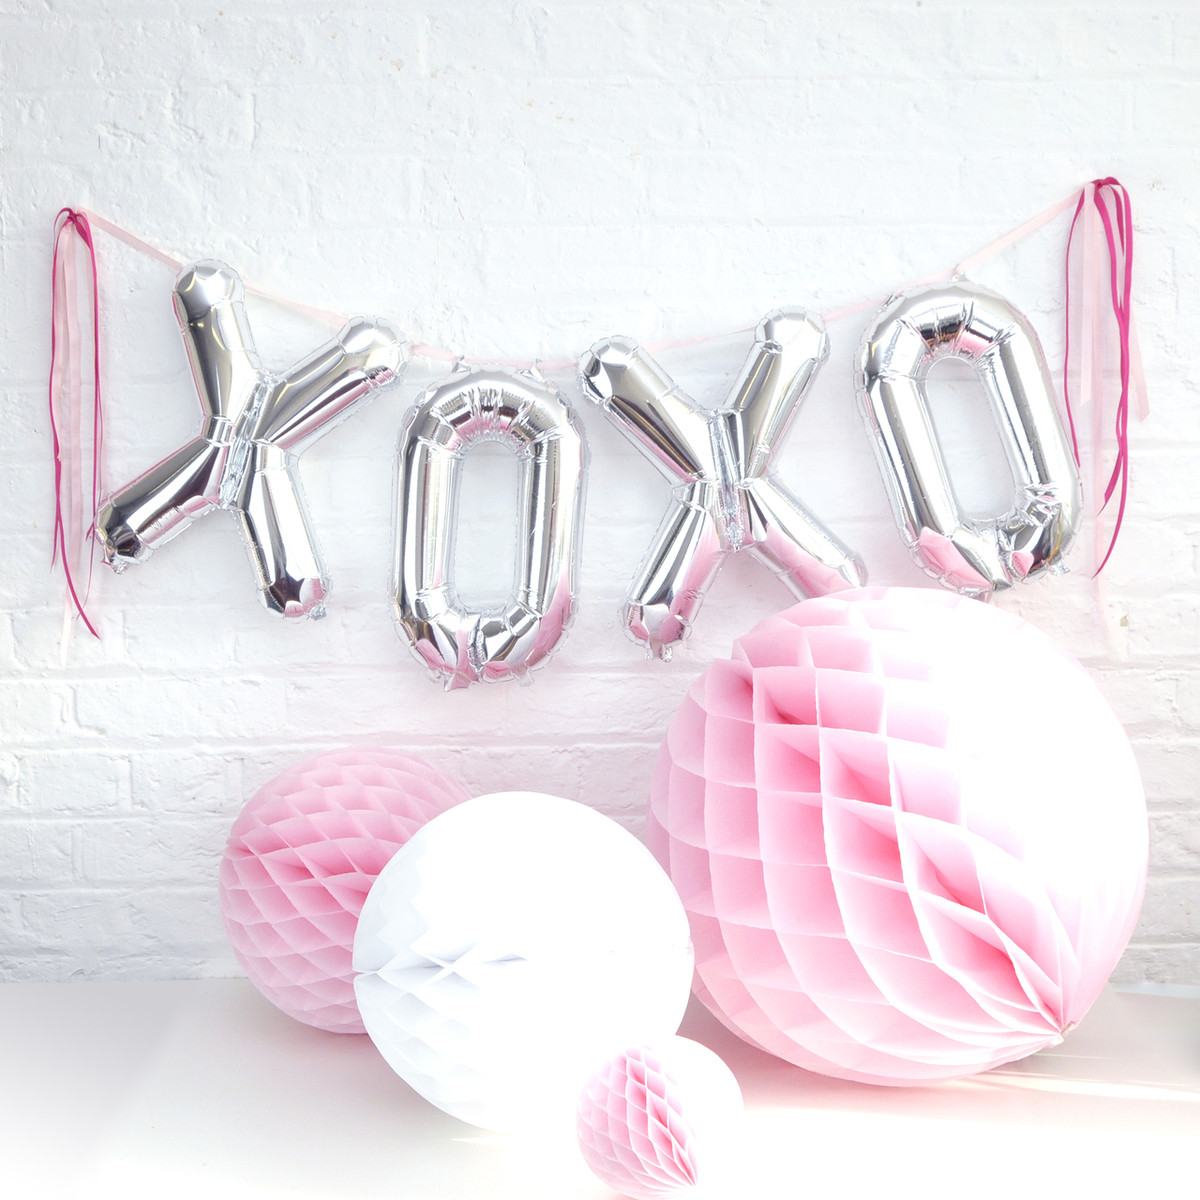 Xoxo Letter Metallic Balloons For Weddings And Parties